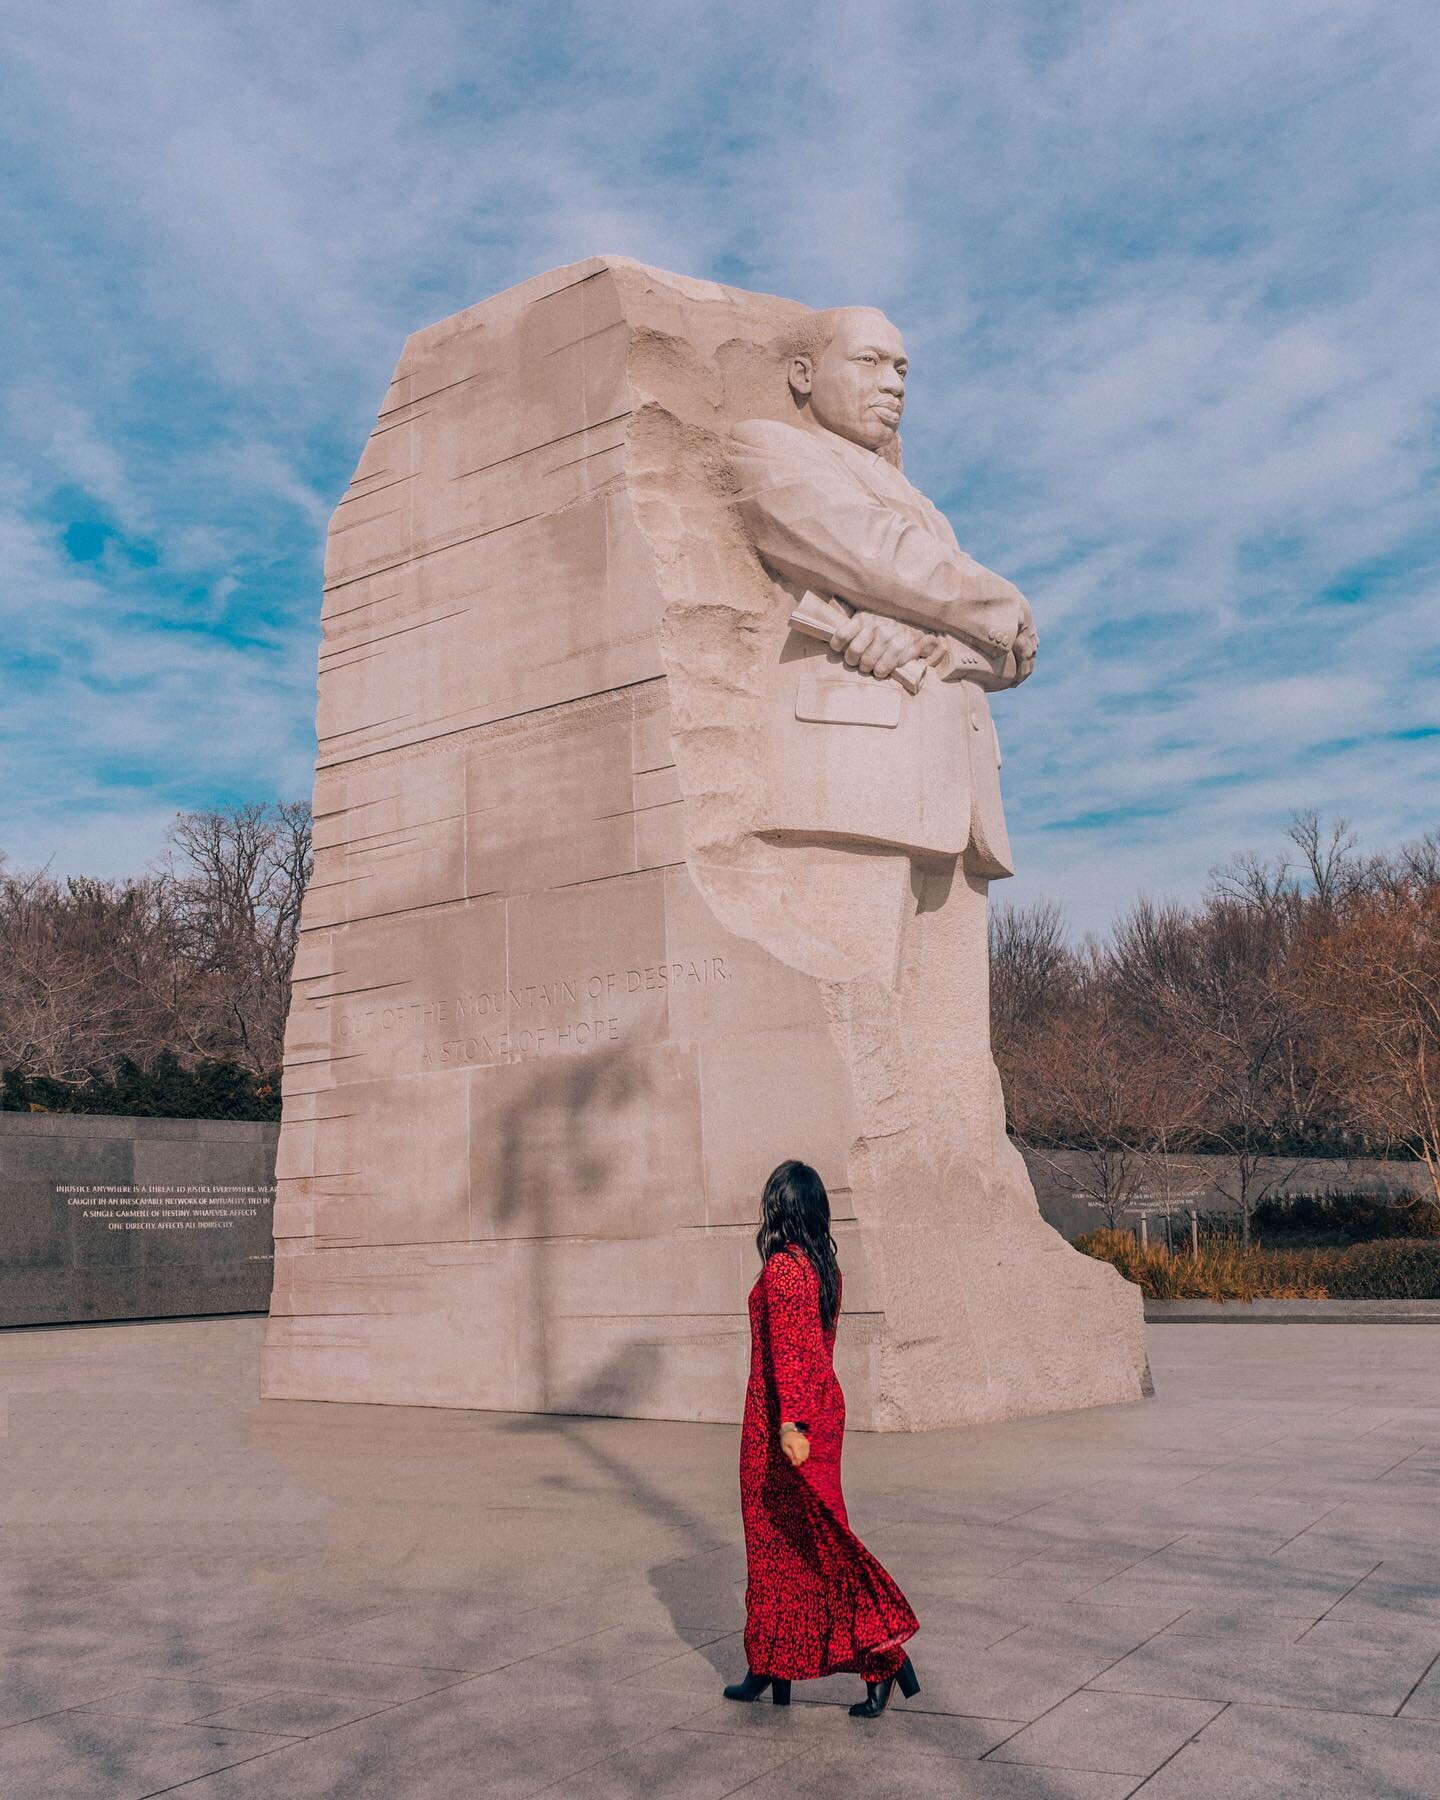 &quot;Out of the mountain of despair, a stone of hope.&quot; &ndash; Dr. Martin Luther King, Jr.

In the crazy world we currently live in, this is the reminder we all need today. For all my non-American friends today is a national holiday in the US: 